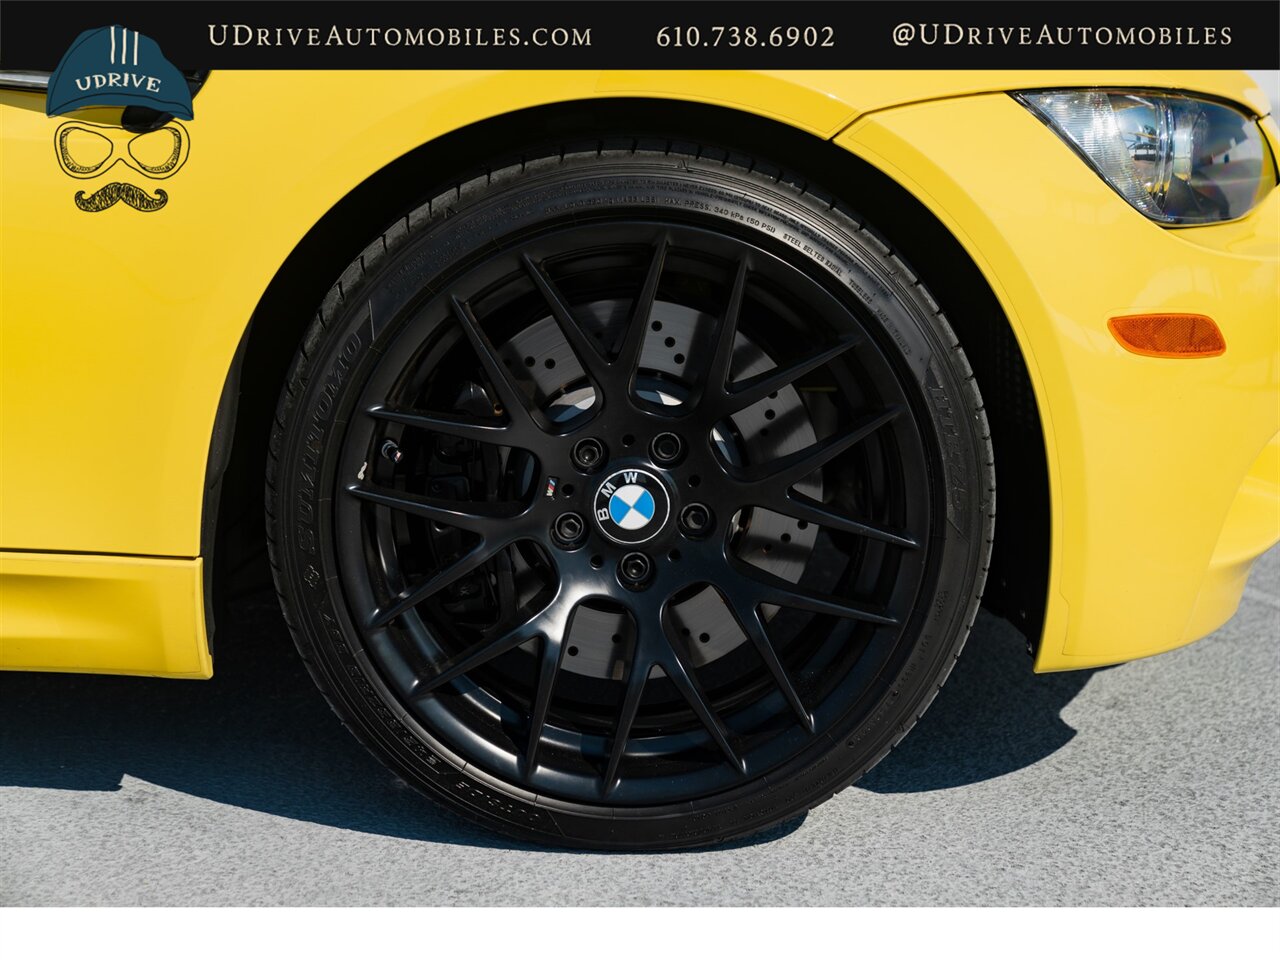 2010 BMW M3  E92 6 Sp Individual Dakar Cloth Seats Carbon Roof No NAV Rod Bearings Replaced - Photo 56 - West Chester, PA 19382